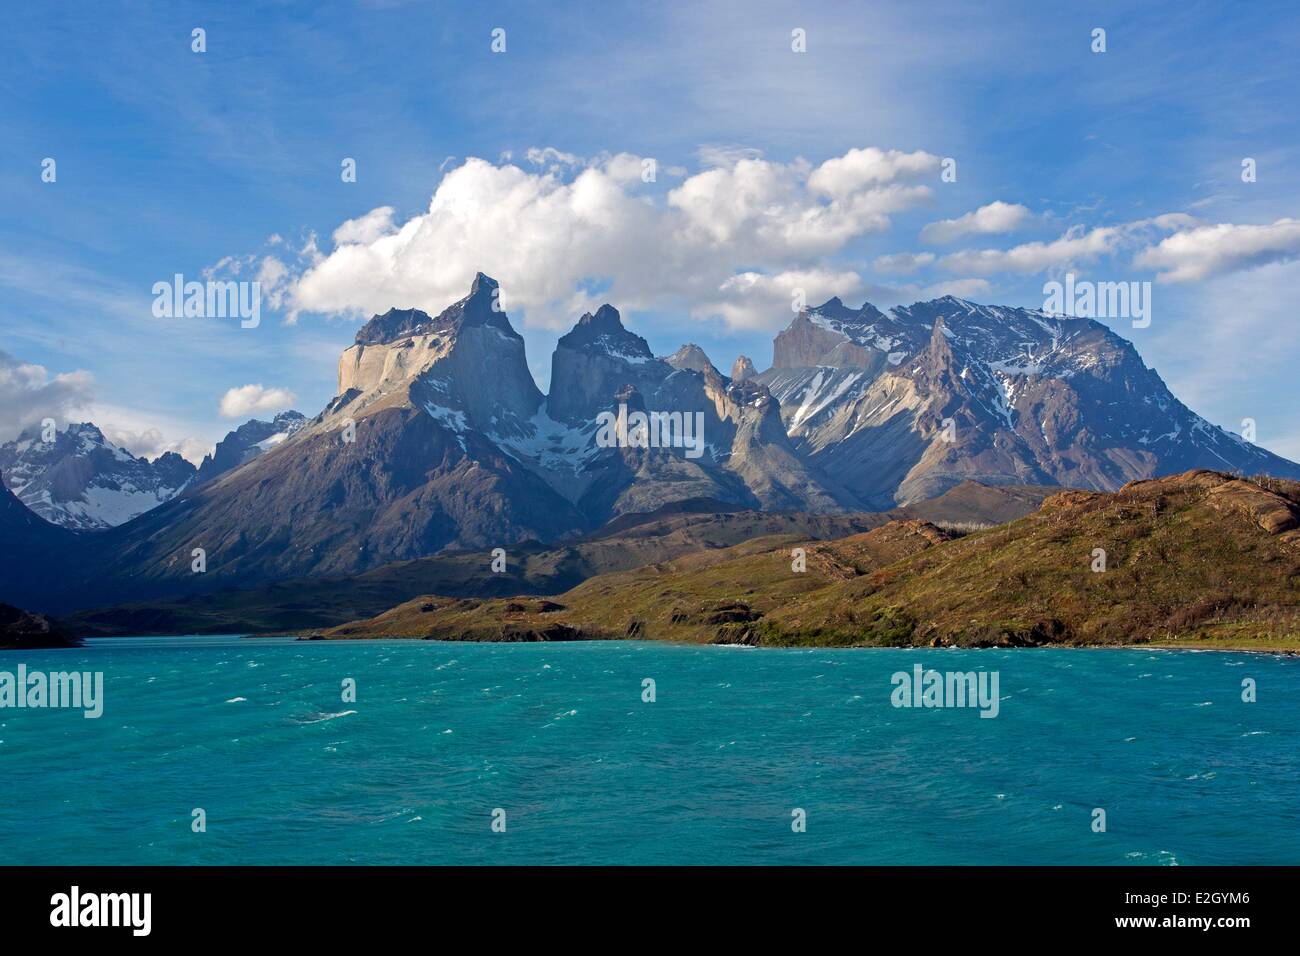 Chile Patagonia Magellan Region Torres del Paine National Park horns of Torres del Paine lake Pehoe in front Stock Photo